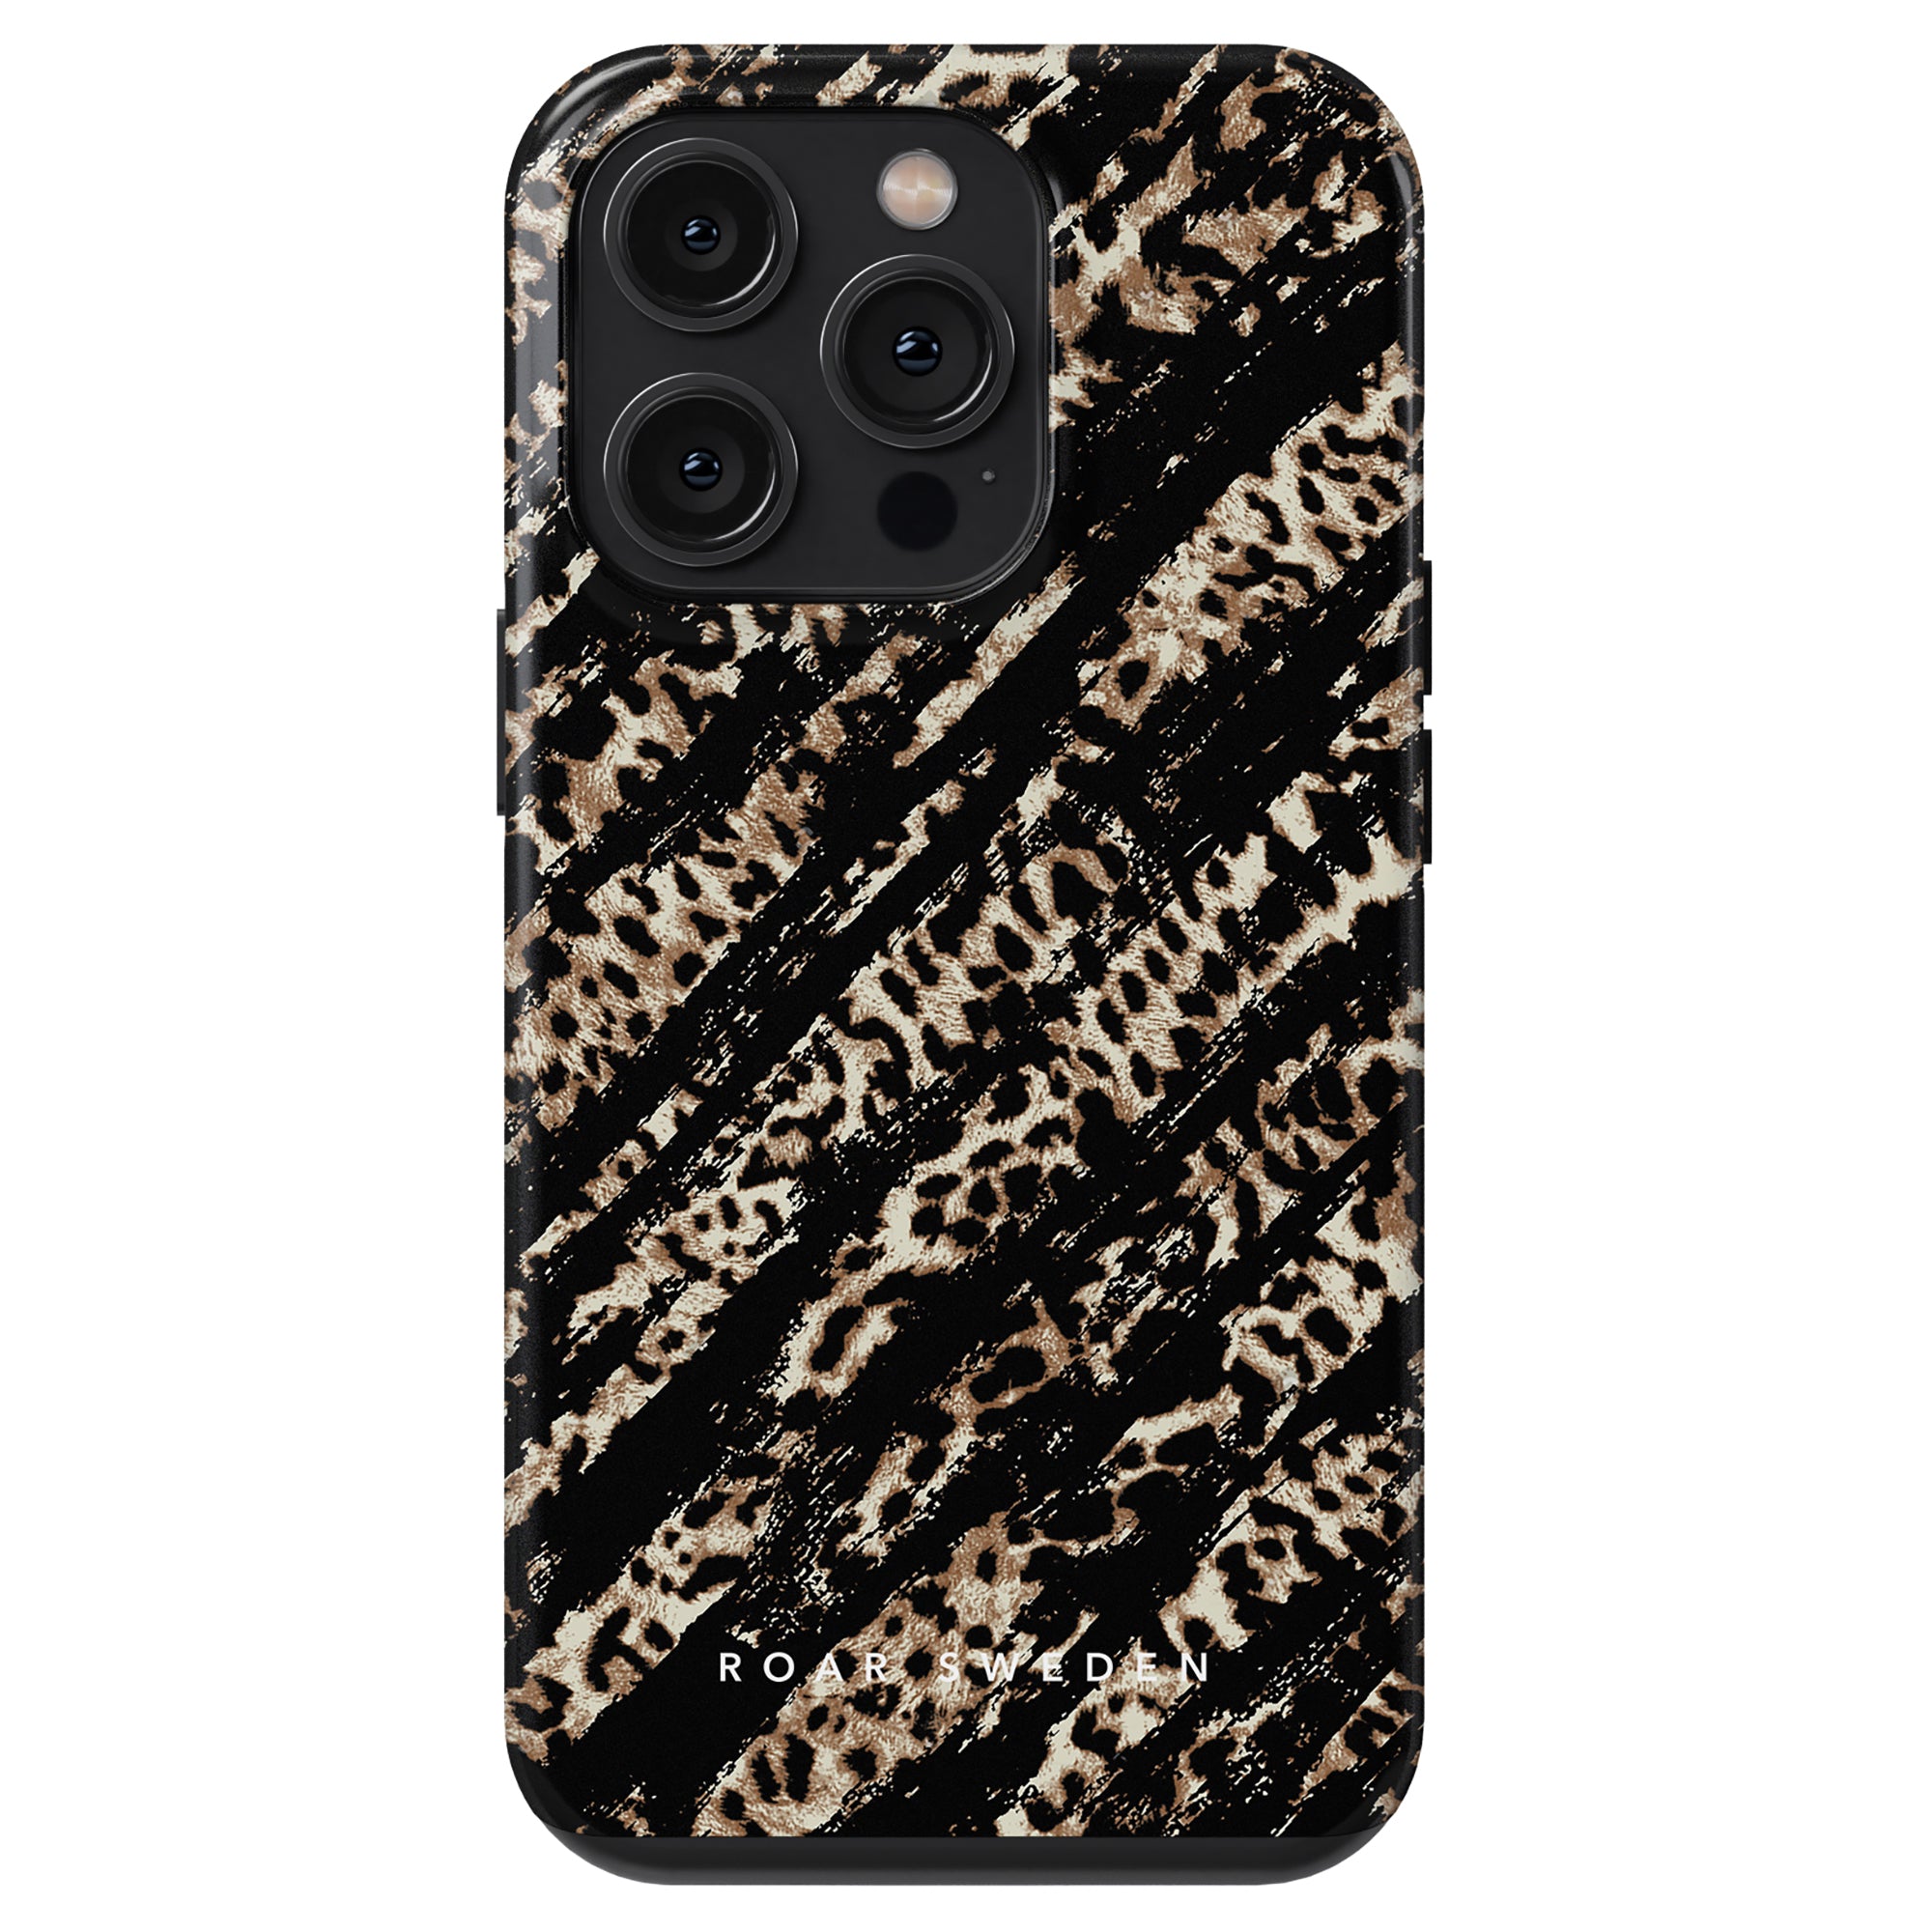 A Claws - Tough Case with a leopard print and striped pattern featuring the logo "roar sweden" at the bottom.